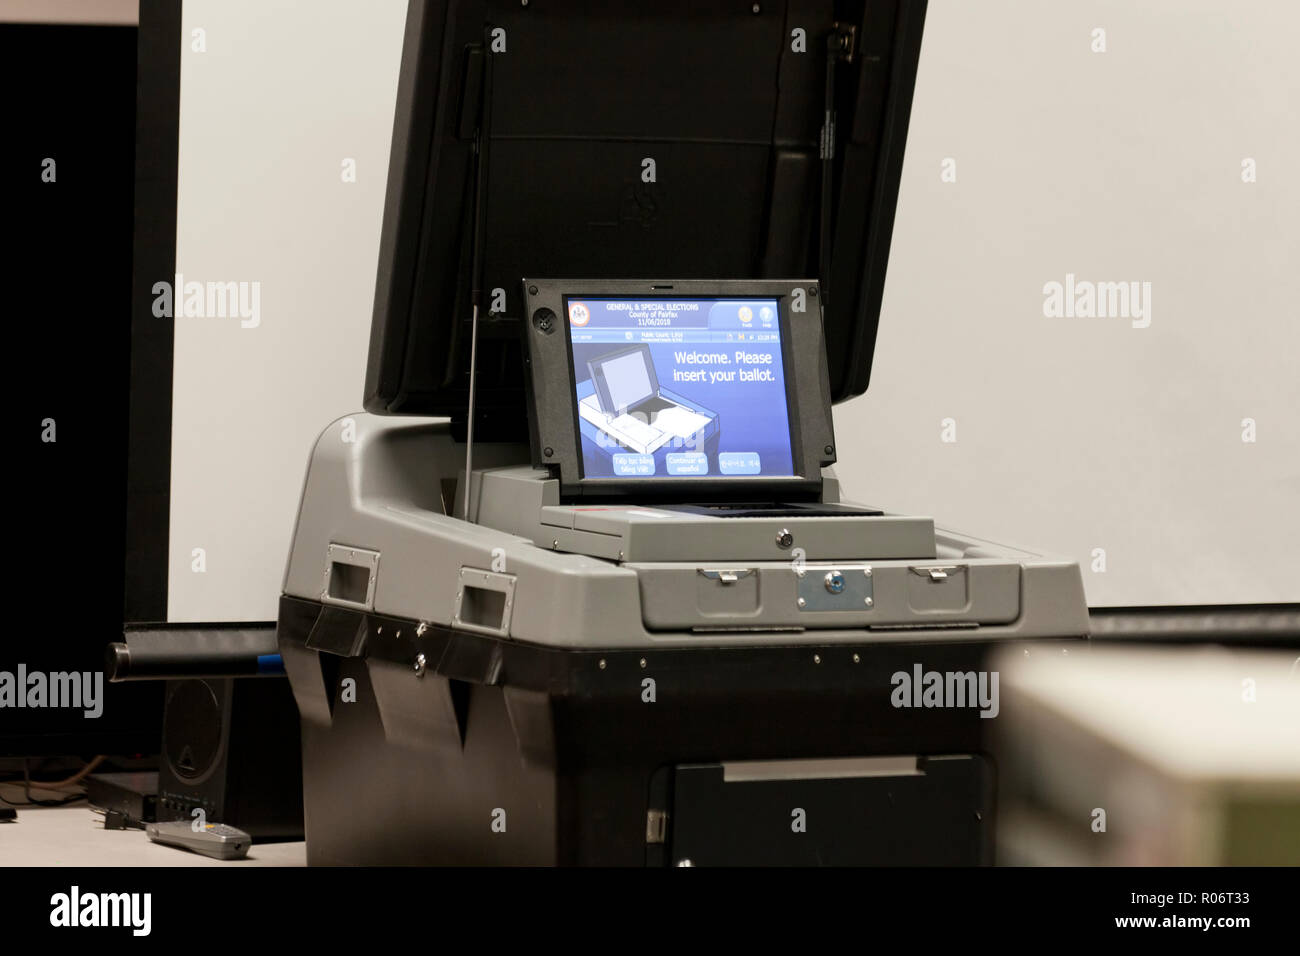 DS200 Precinct scanner & tabulator optical scan voting system in a polling place - Fairfax County, Virginia USA Stock Photo